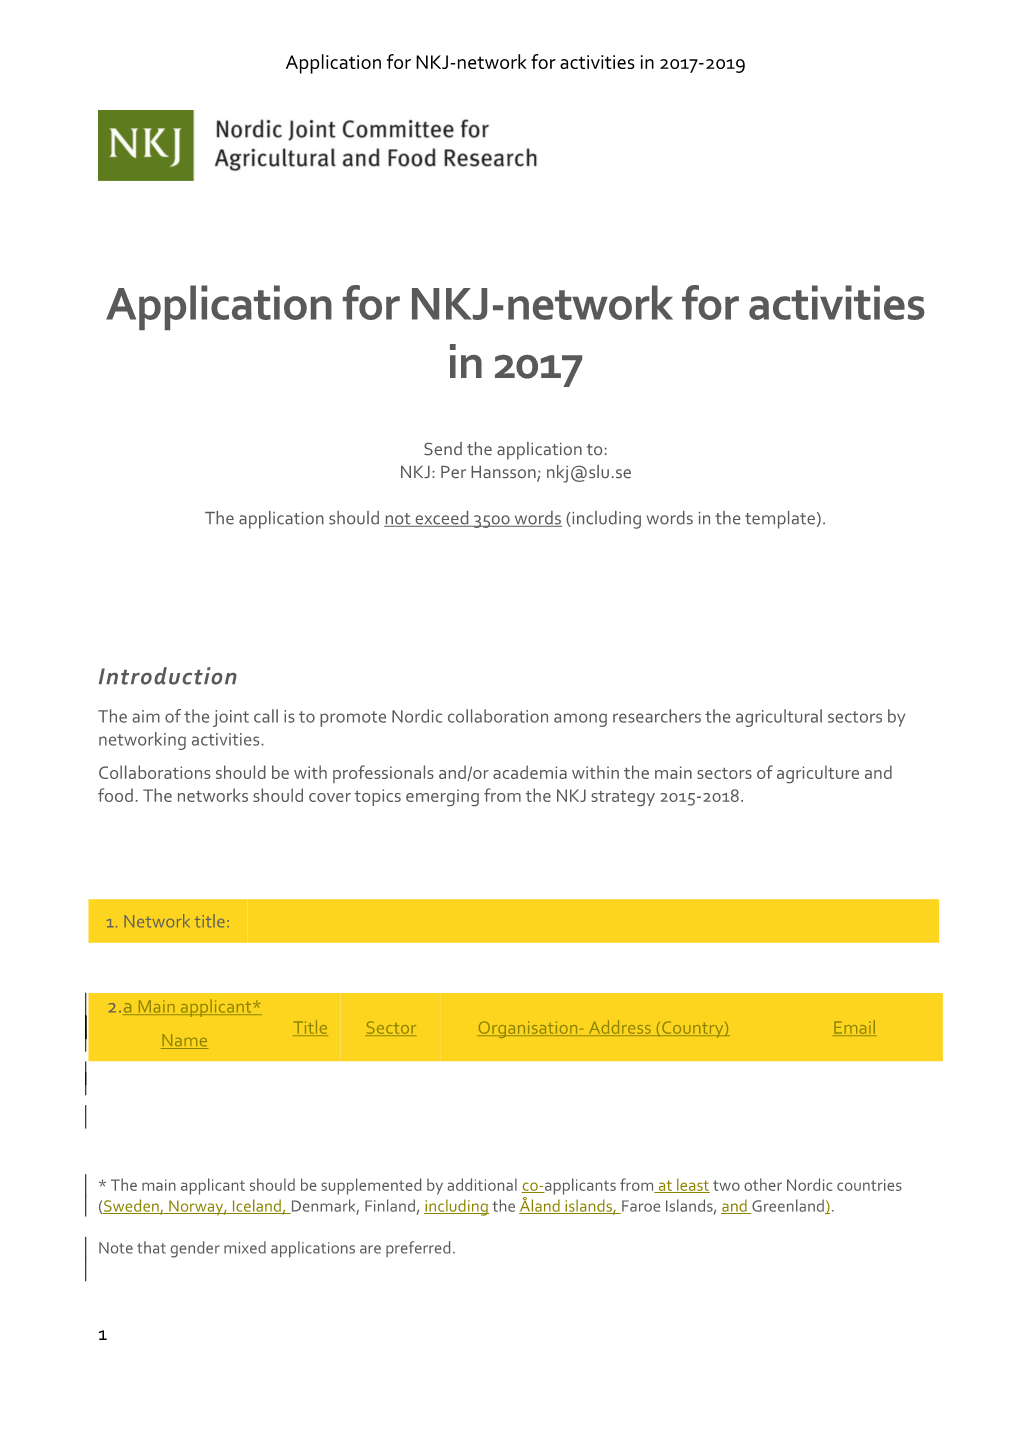 Application for NKJ-Network for Activities in 2017-2019